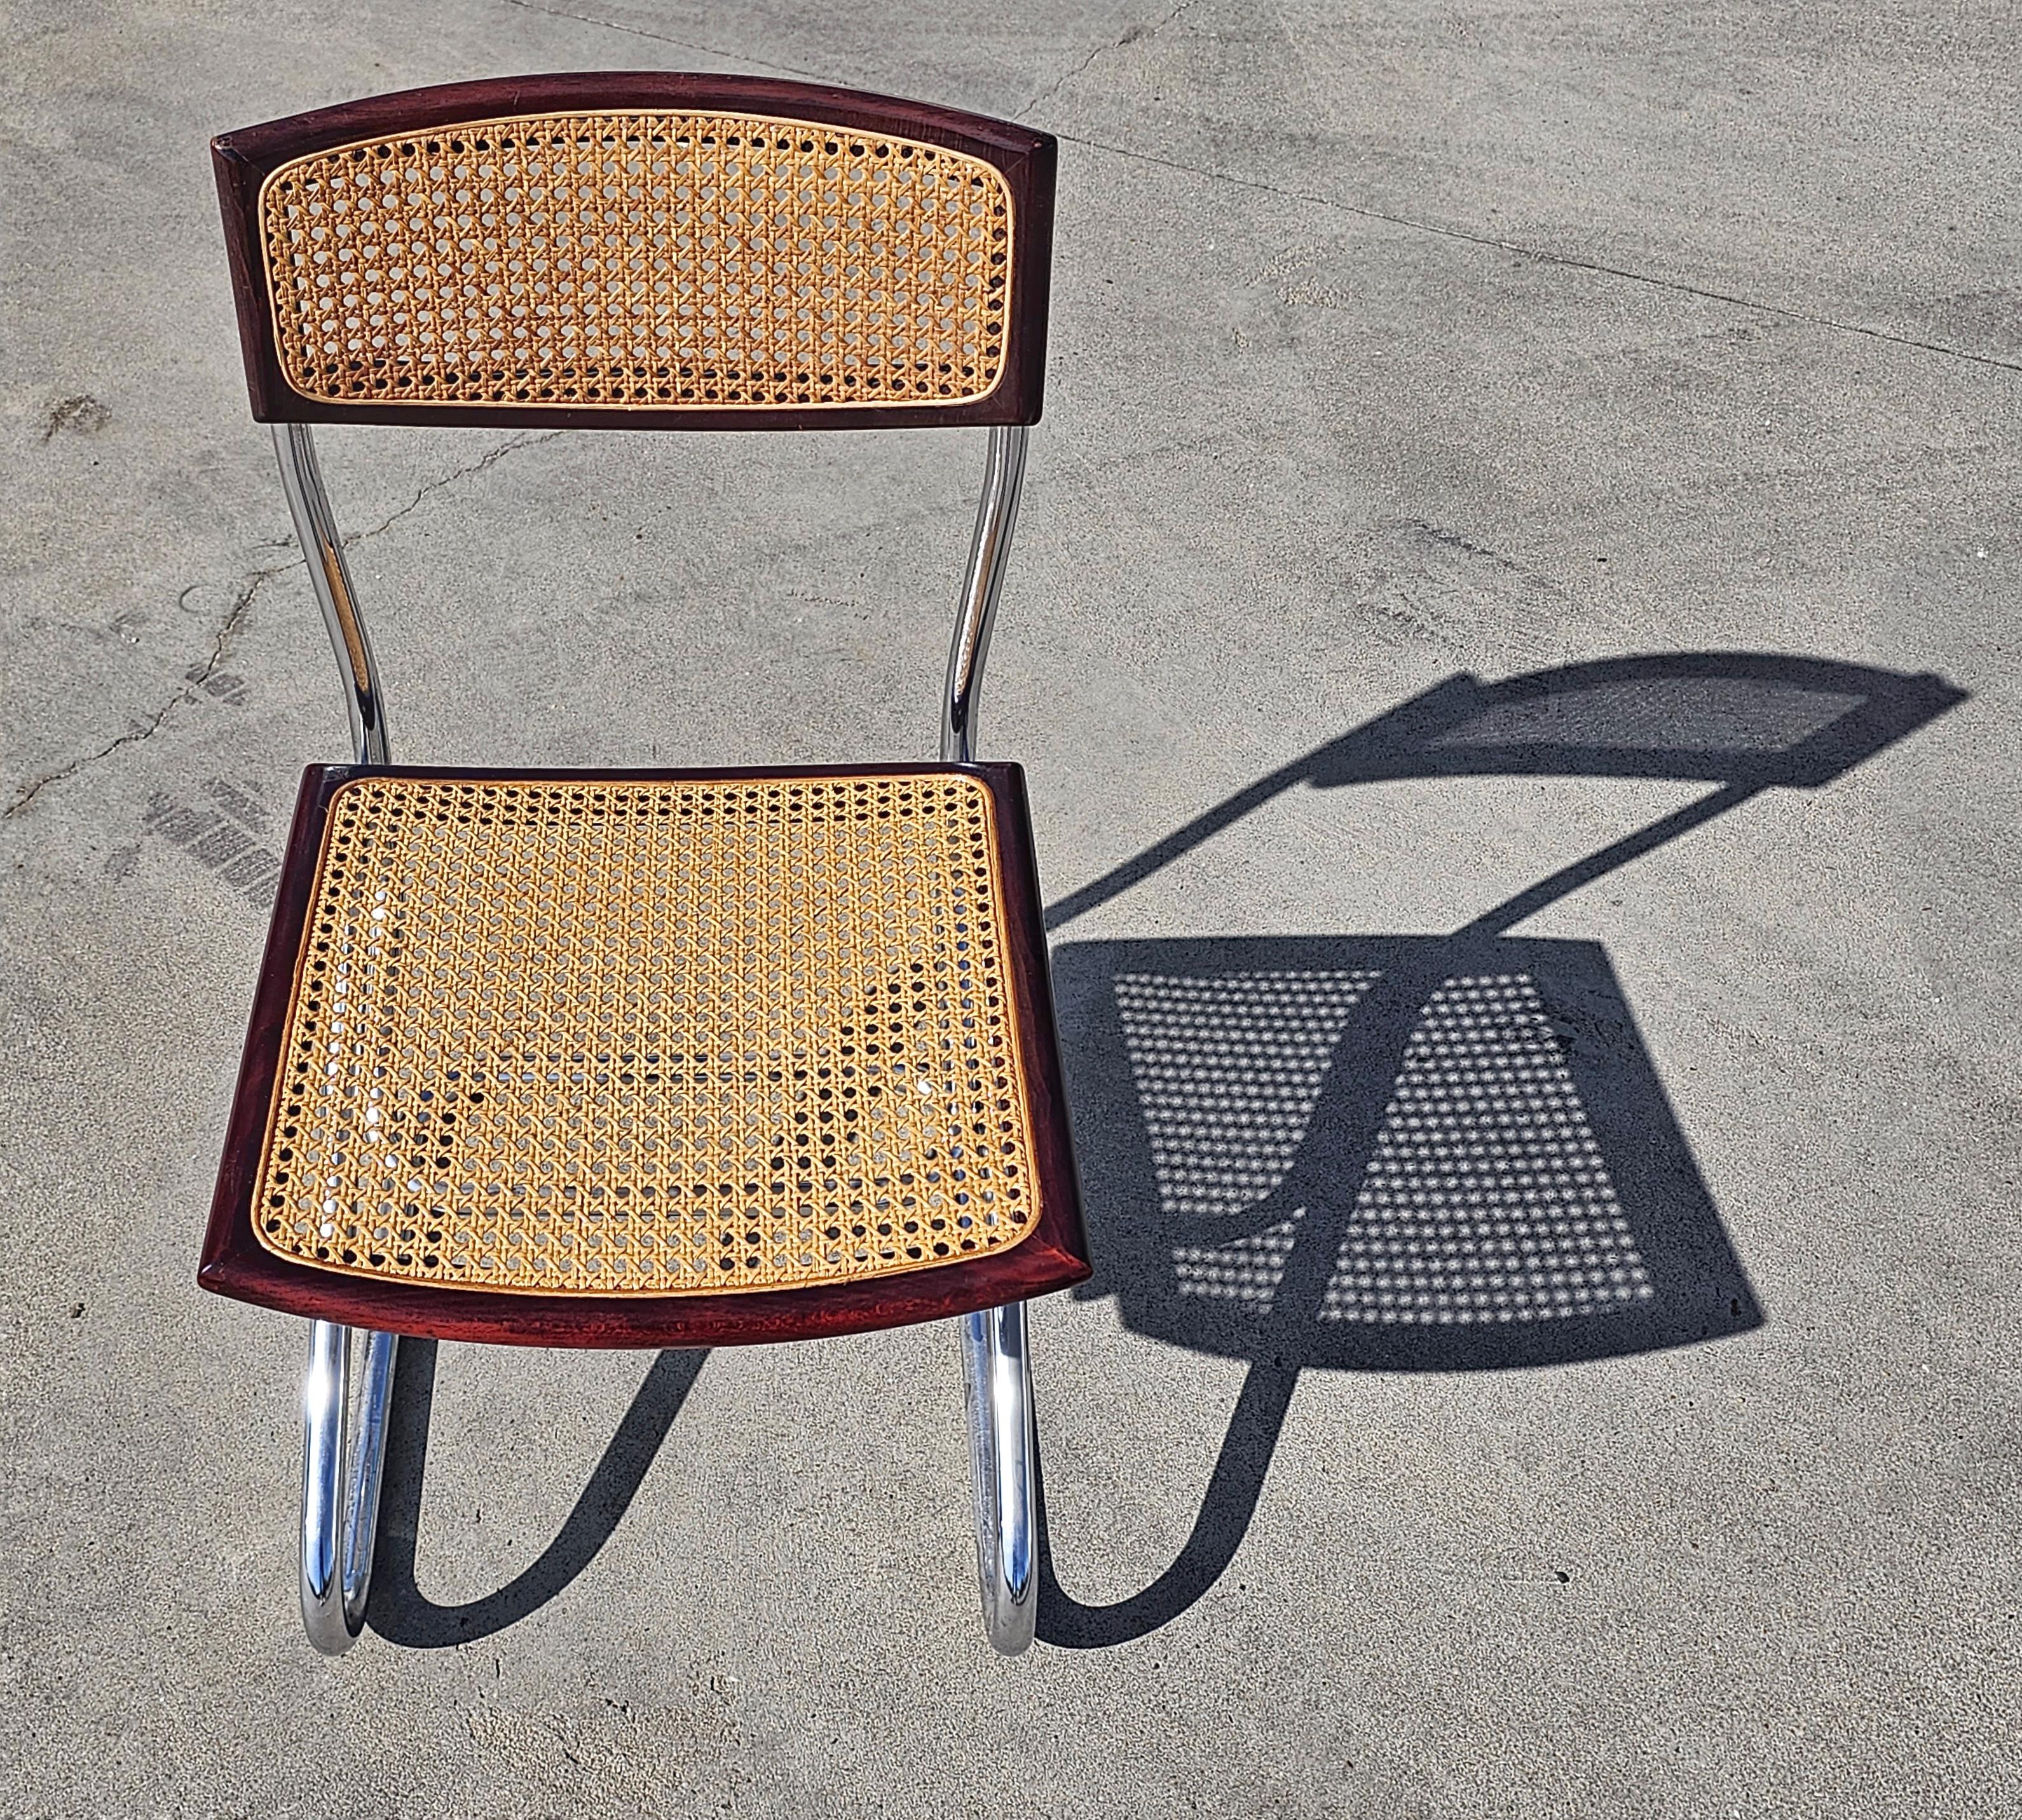 1 of 2 Bauhaus Style Tubular Dining Chairs with Cane Seats, Italy 1970s For Sale 2